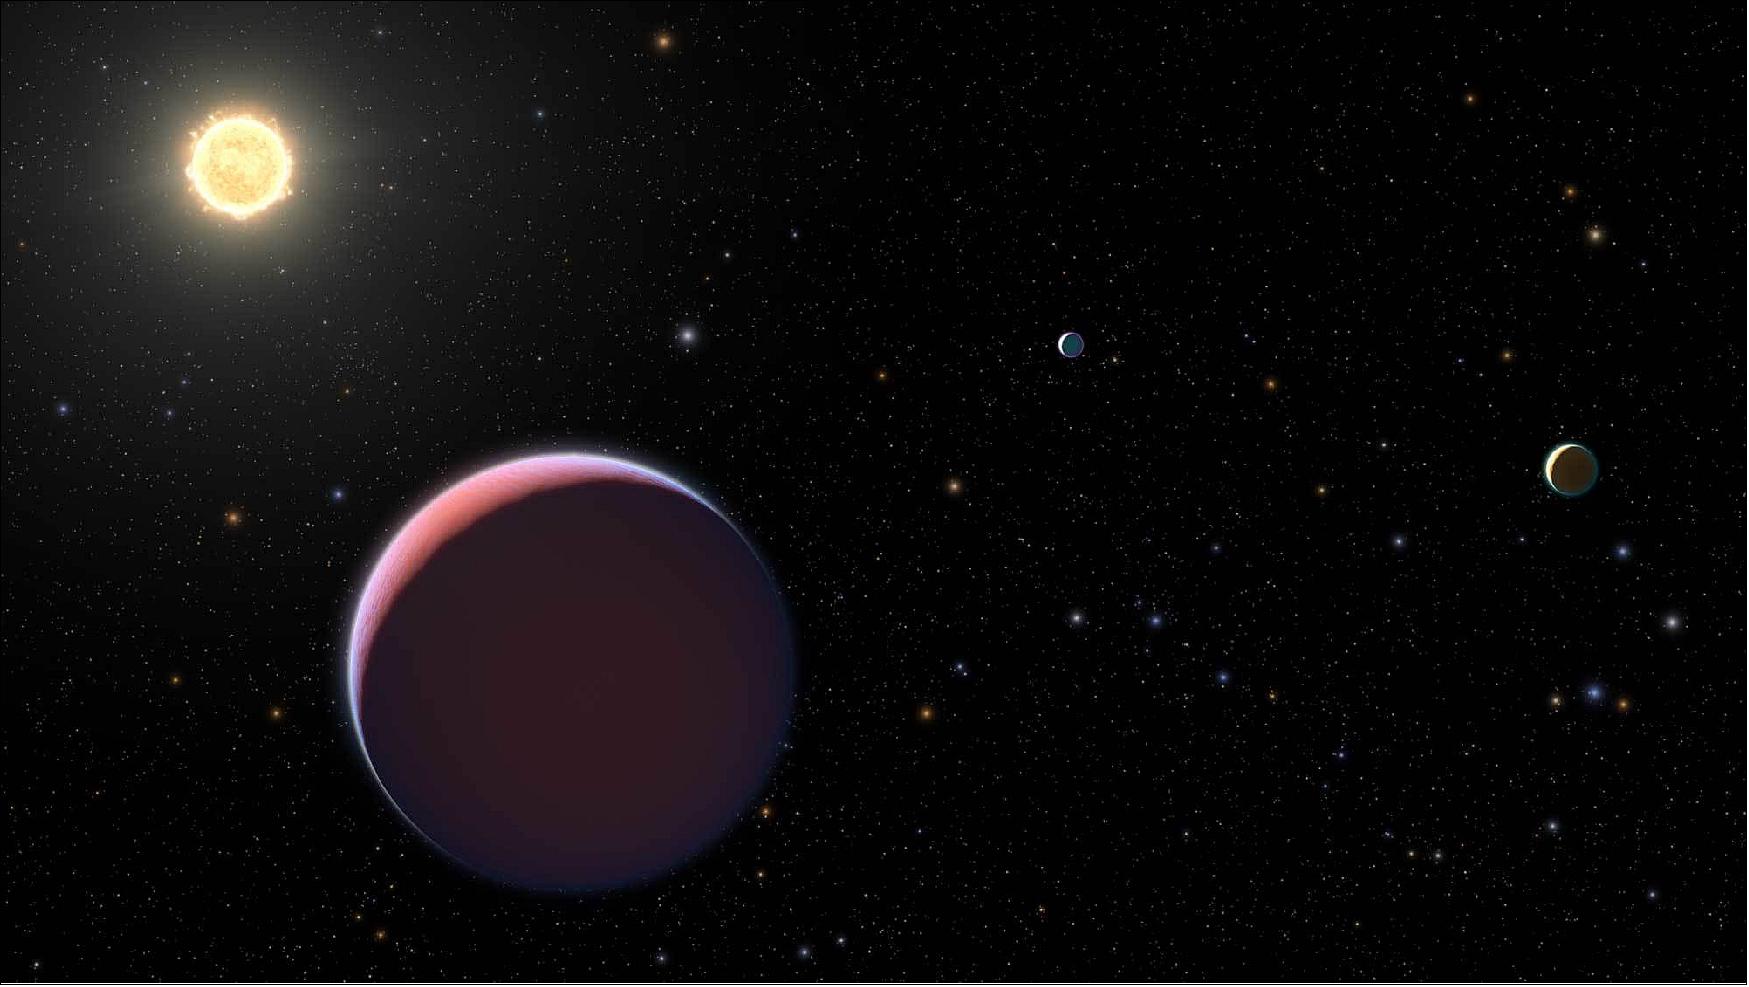 Figure 2: This illustration depicts the Sun-like star Kepler 51 and three giant planets that NASA's Kepler space telescope discovered in 2012–2014. These planets are all roughly the size of Jupiter but a tiny fraction of its mass. This means the planets have an extraordinarily low density, more like that of Styrofoam rather than rock or water, based on new Hubble Space Telescope observations. The planets may have formed much farther from their star and migrated inward. Now their puffed-up hydrogen/helium atmospheres are bleeding off into space. Eventually, much smaller planets might be left behind. The background starfield is correctly plotted as it would look if we gazed back toward our Sun from Kepler 51's distance of approximately 2,600 light-years, along our galaxy's Orion spiral arm. However, the Sun is too faint to be seen in this simulated naked-eye view [image credit: NASA, ESA, and L. Hustak, J. Olmsted, D. Player and F. Summers (STScI)]